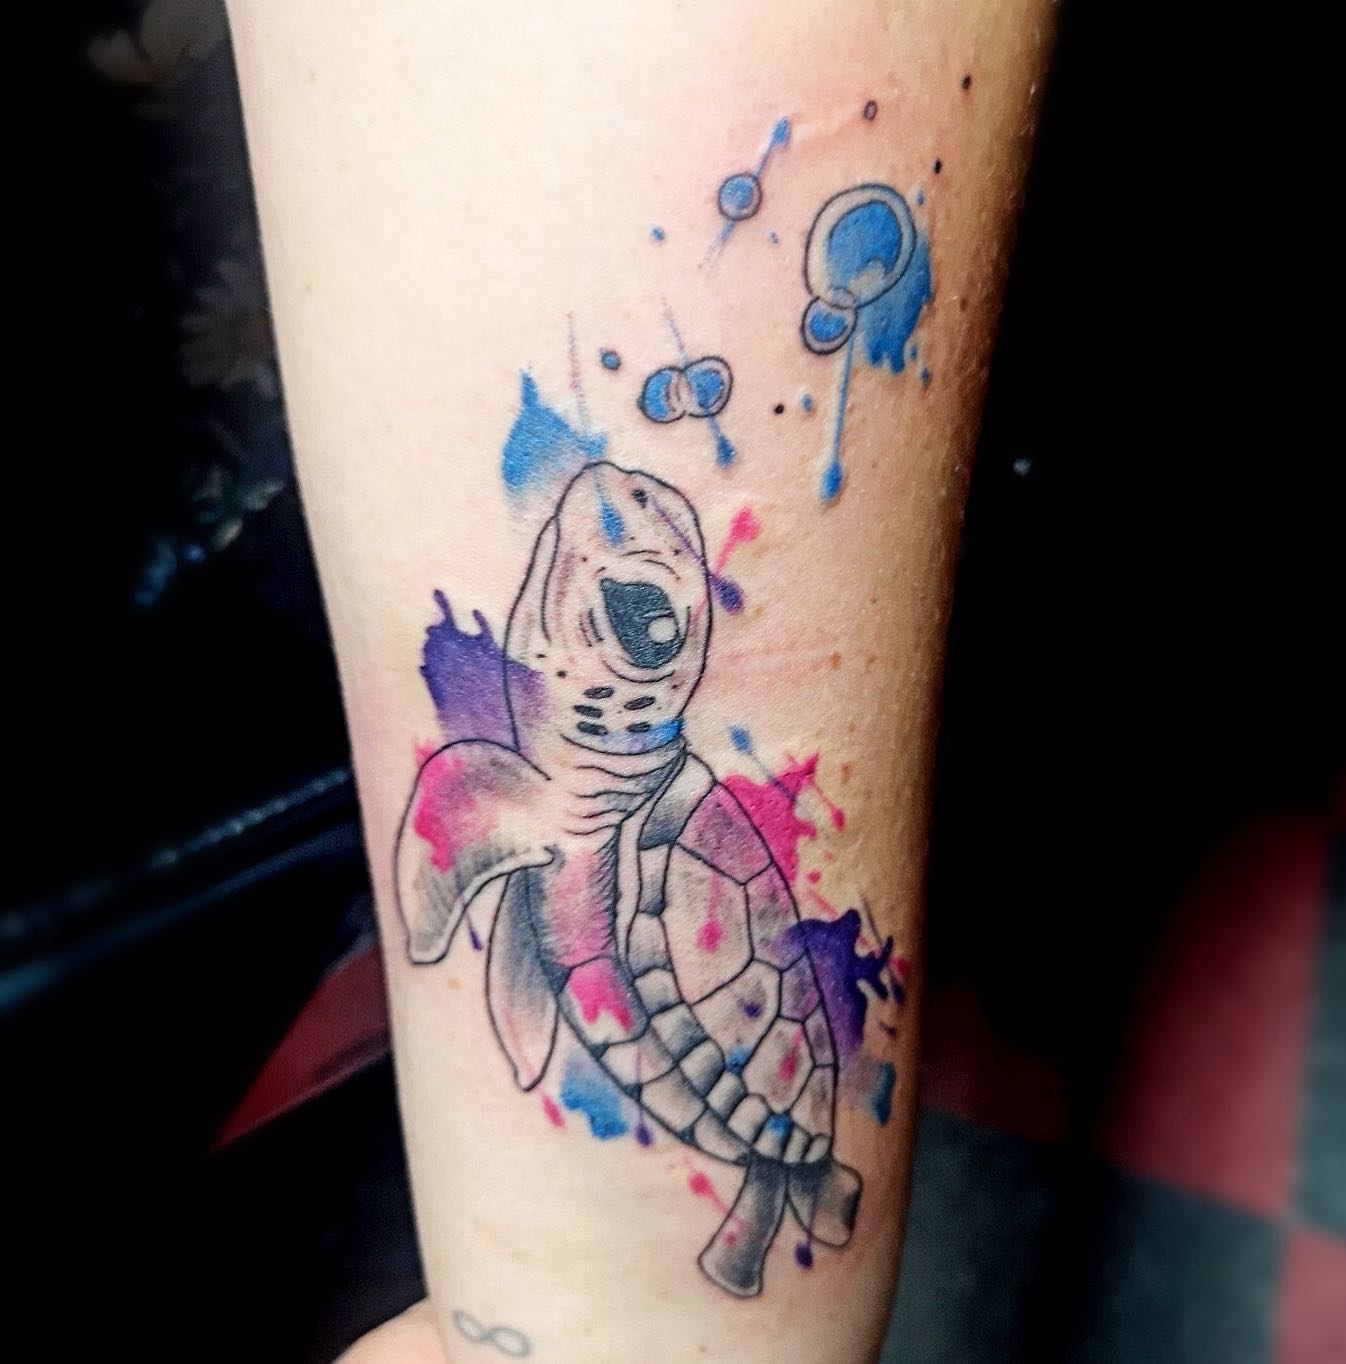 The color splash effect is so unique that it feels like you splash colors randomly to the tattoo. It's a really great way to show off the turtle, and it adds a lot of personality to the tattoo.